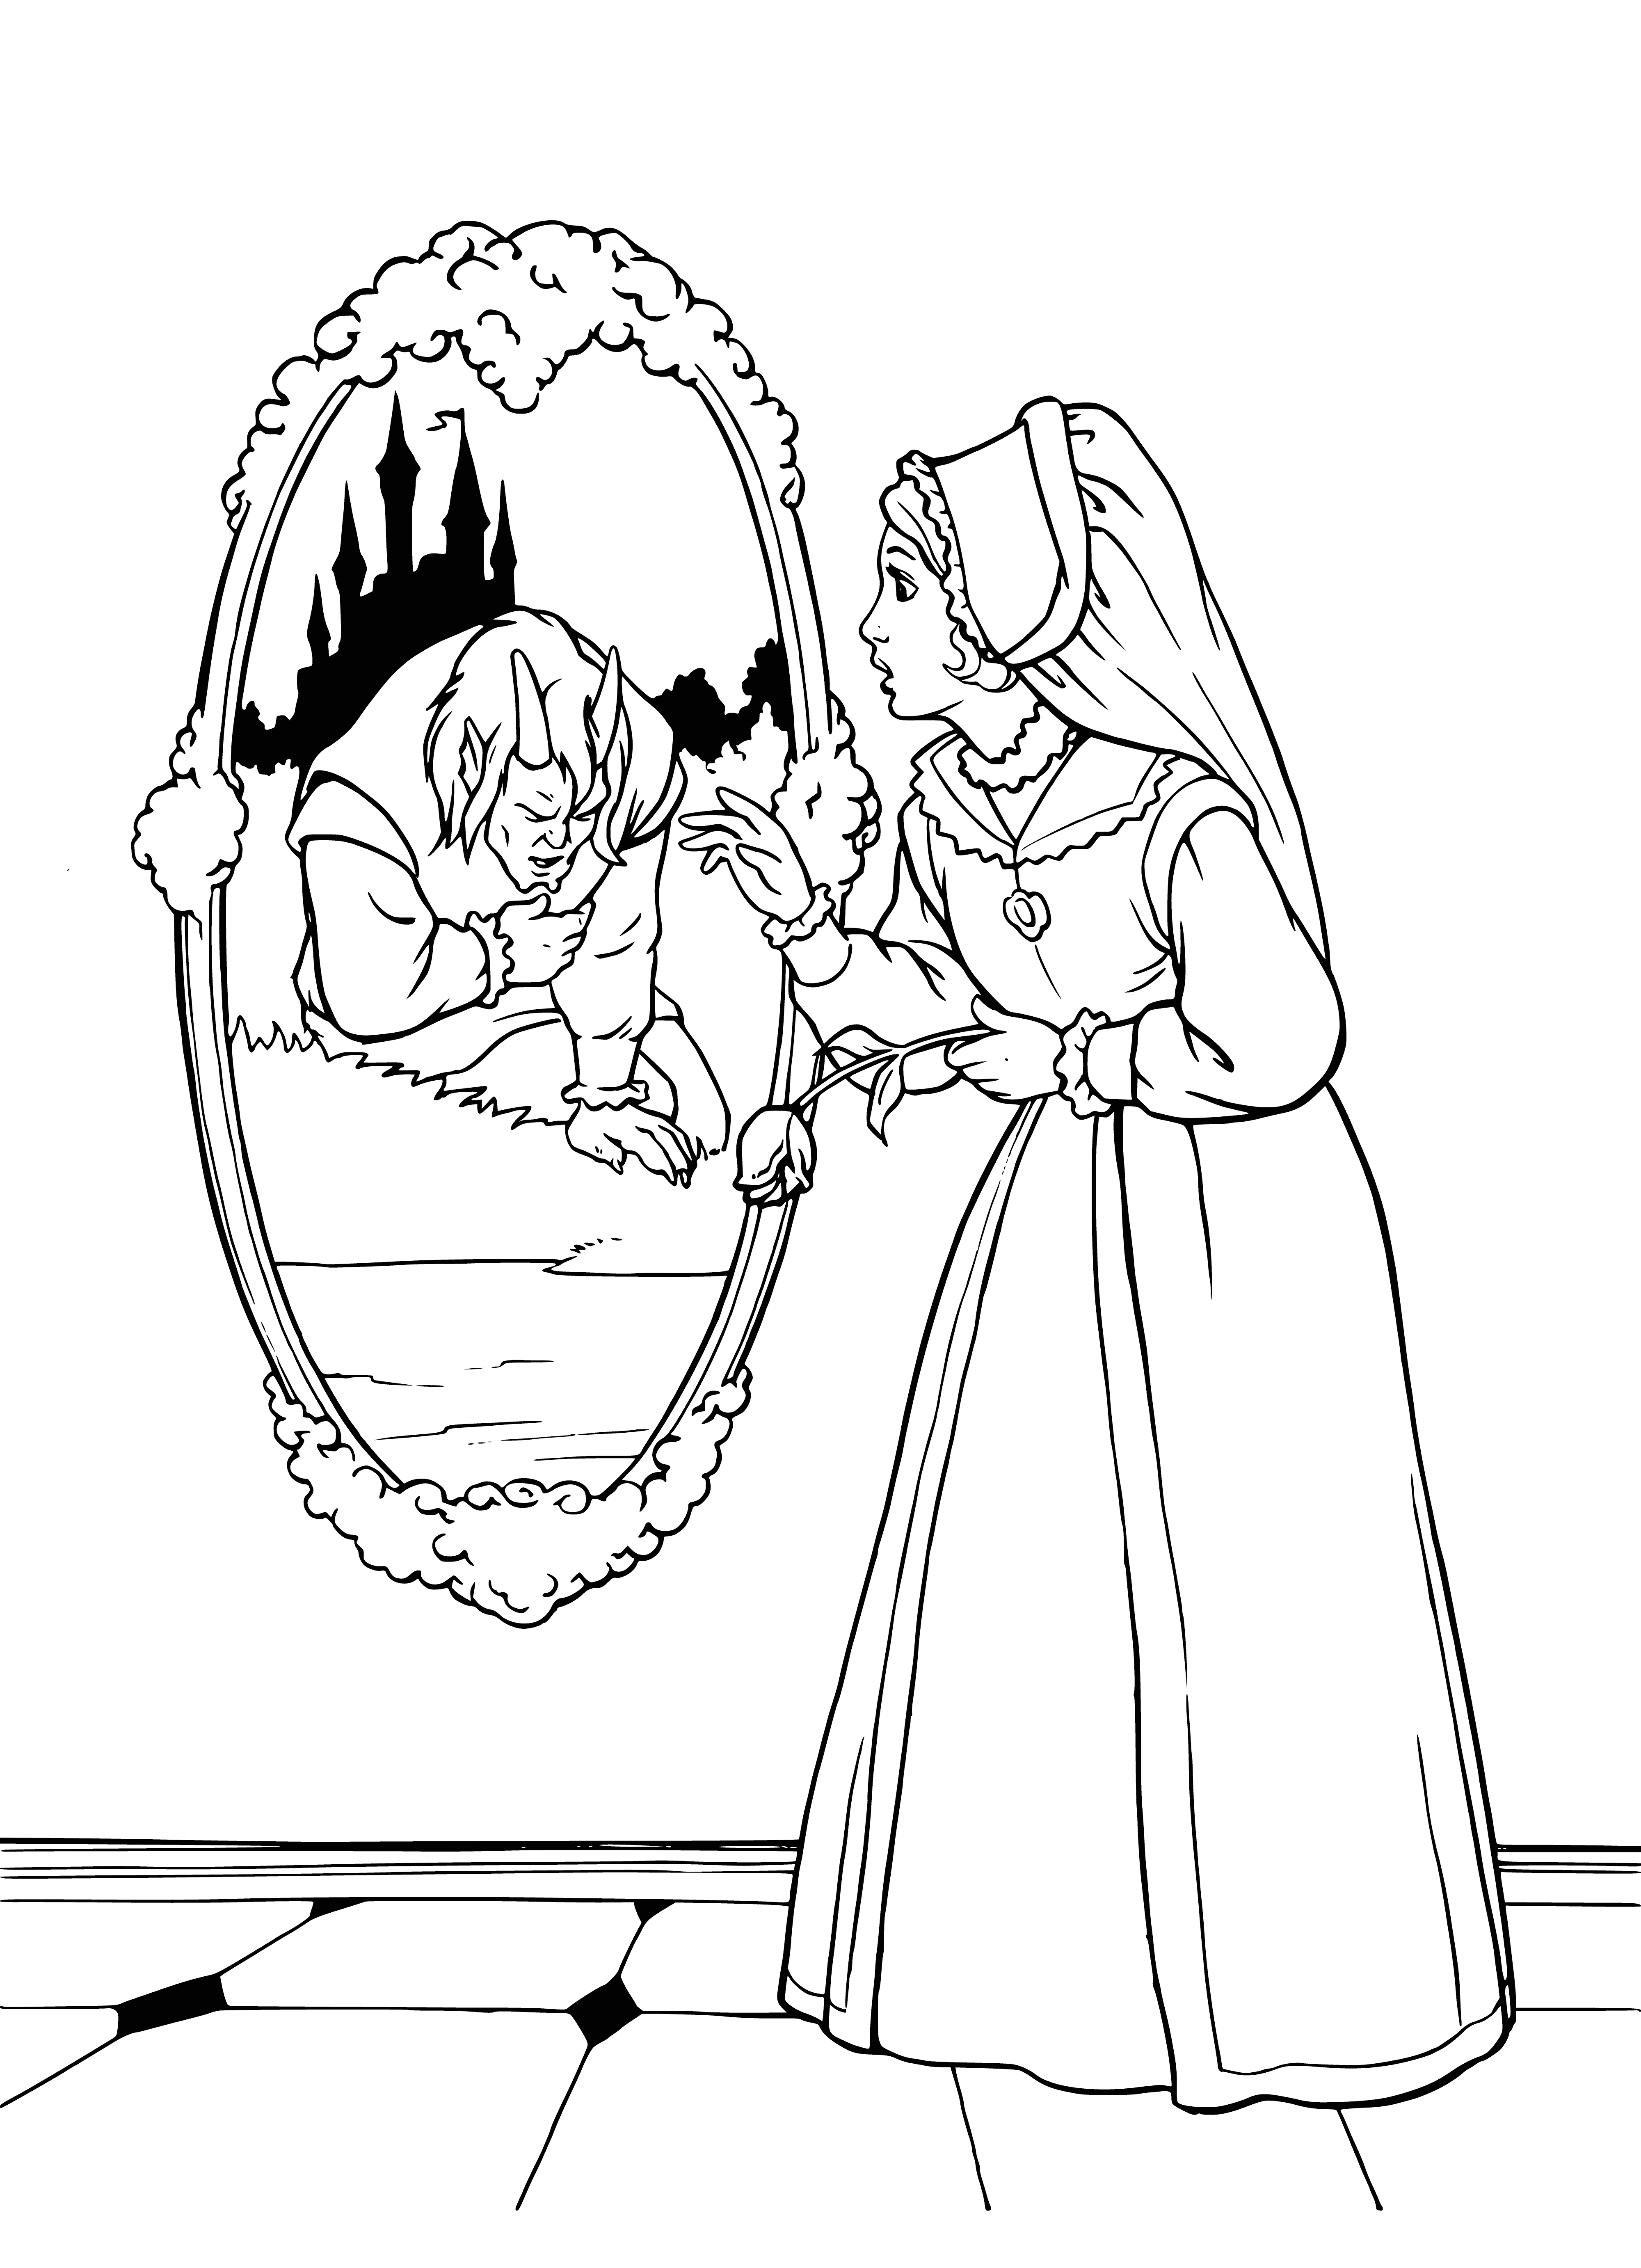 A monster coloring page